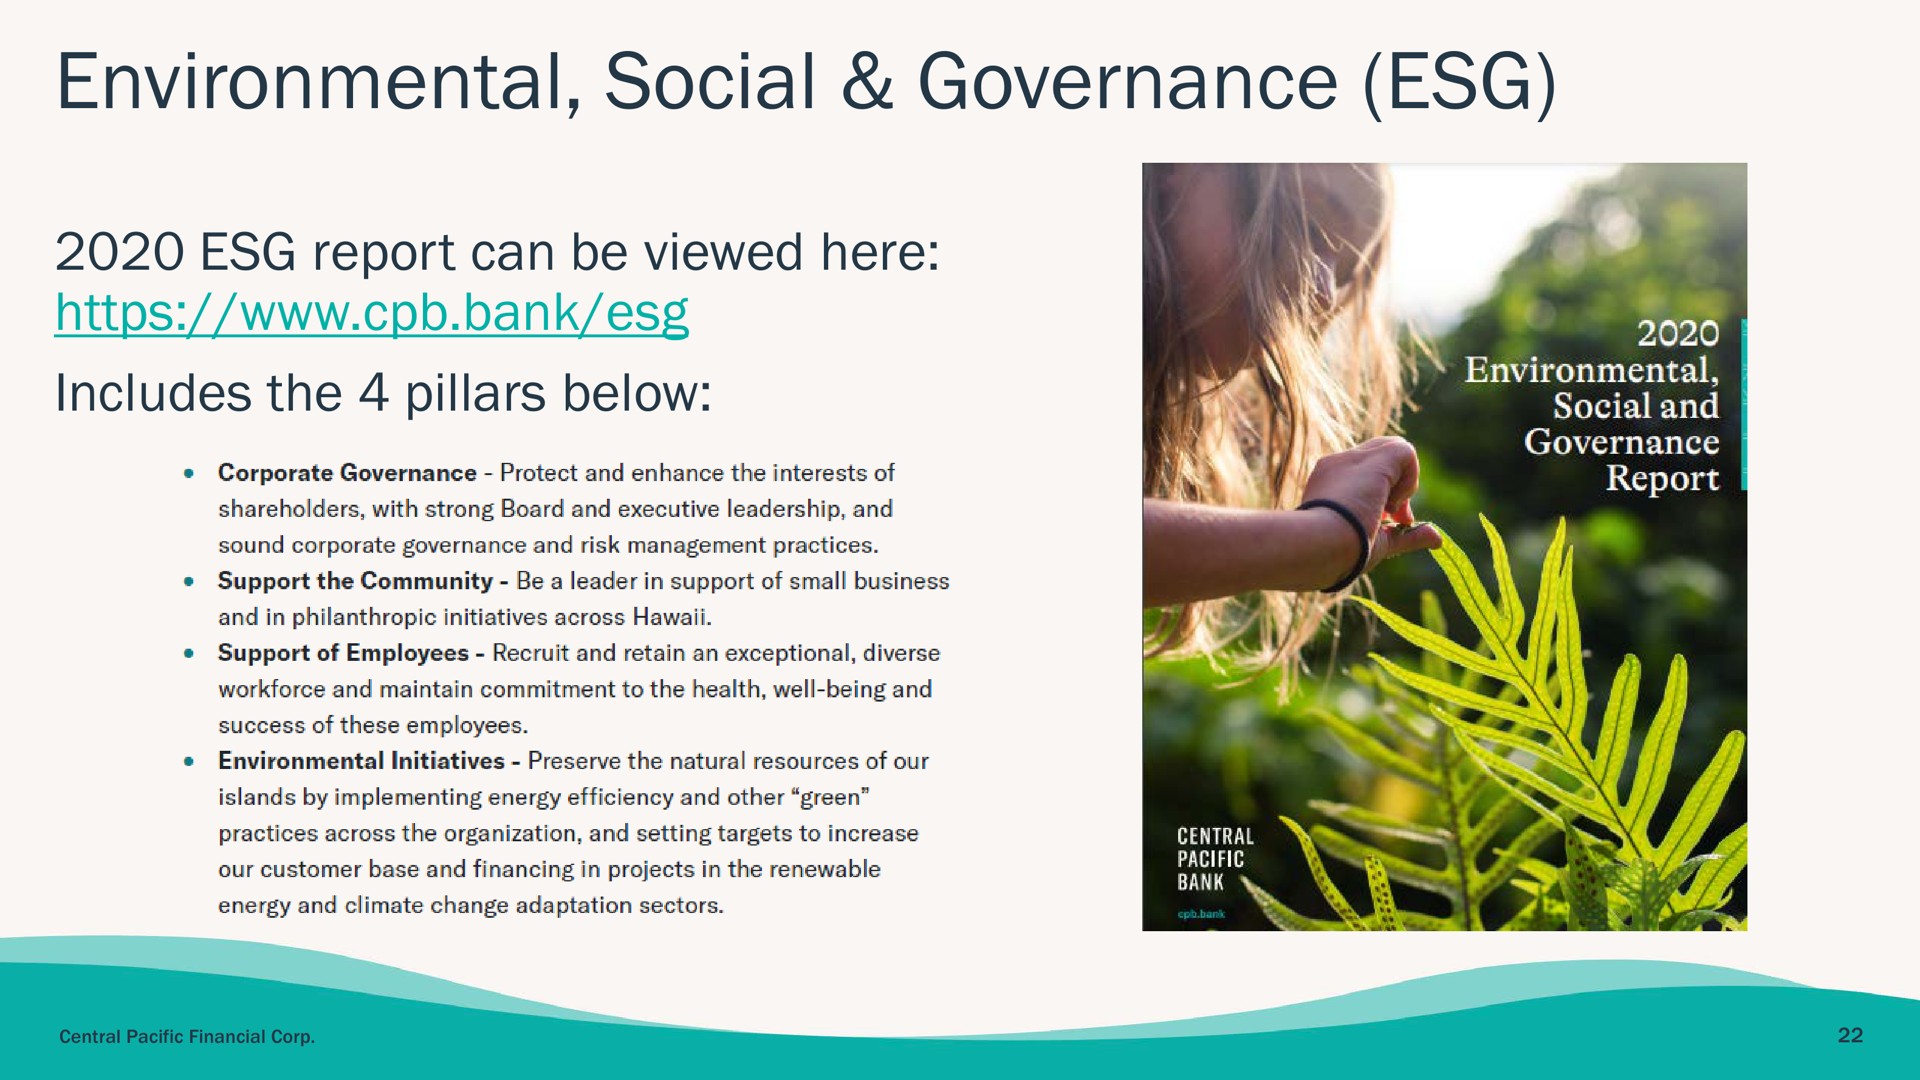 environmental social governance report can be viewed here includes the pillars below or and | Central Pacific Financial